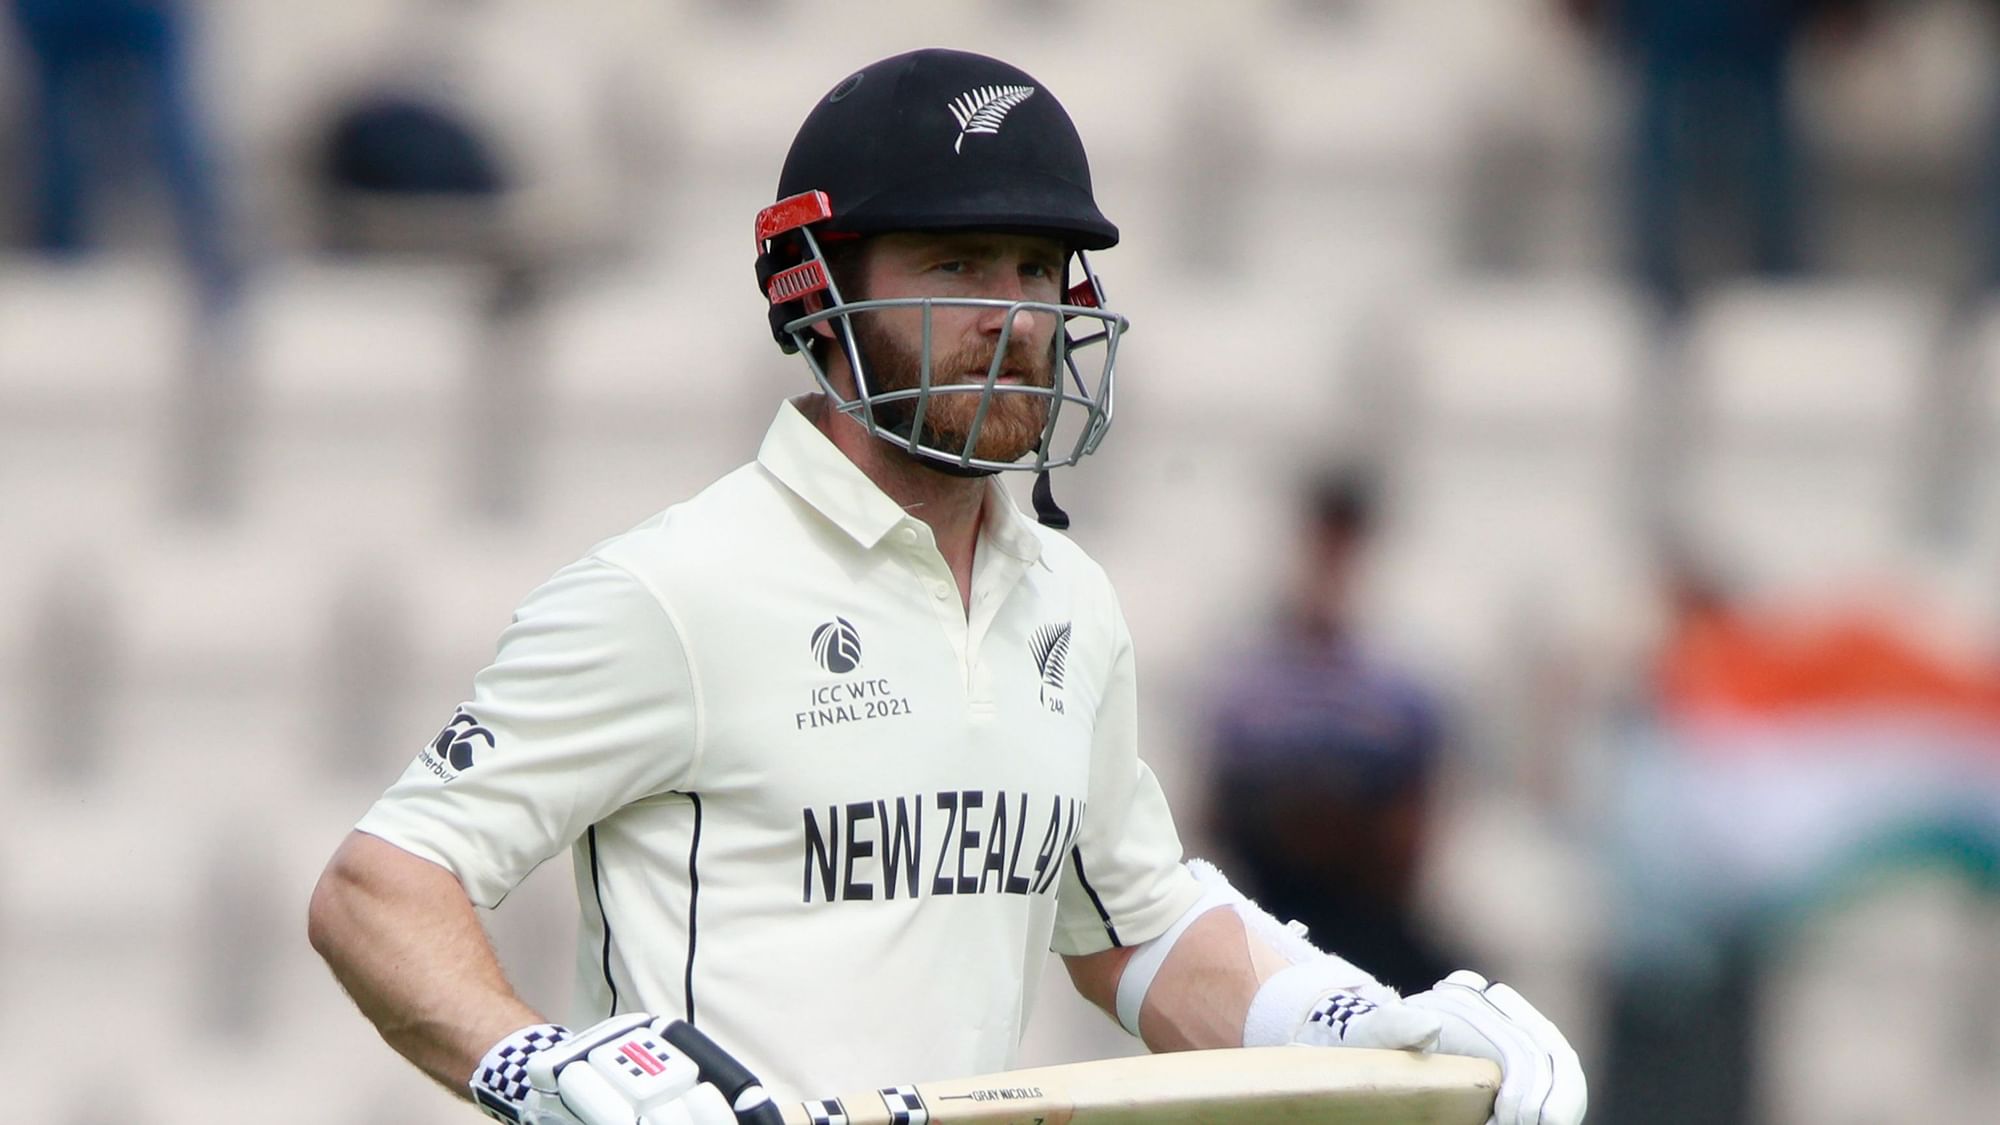 Kane Williamson has stayed back home in England after the WTC Final and will return home only in December.